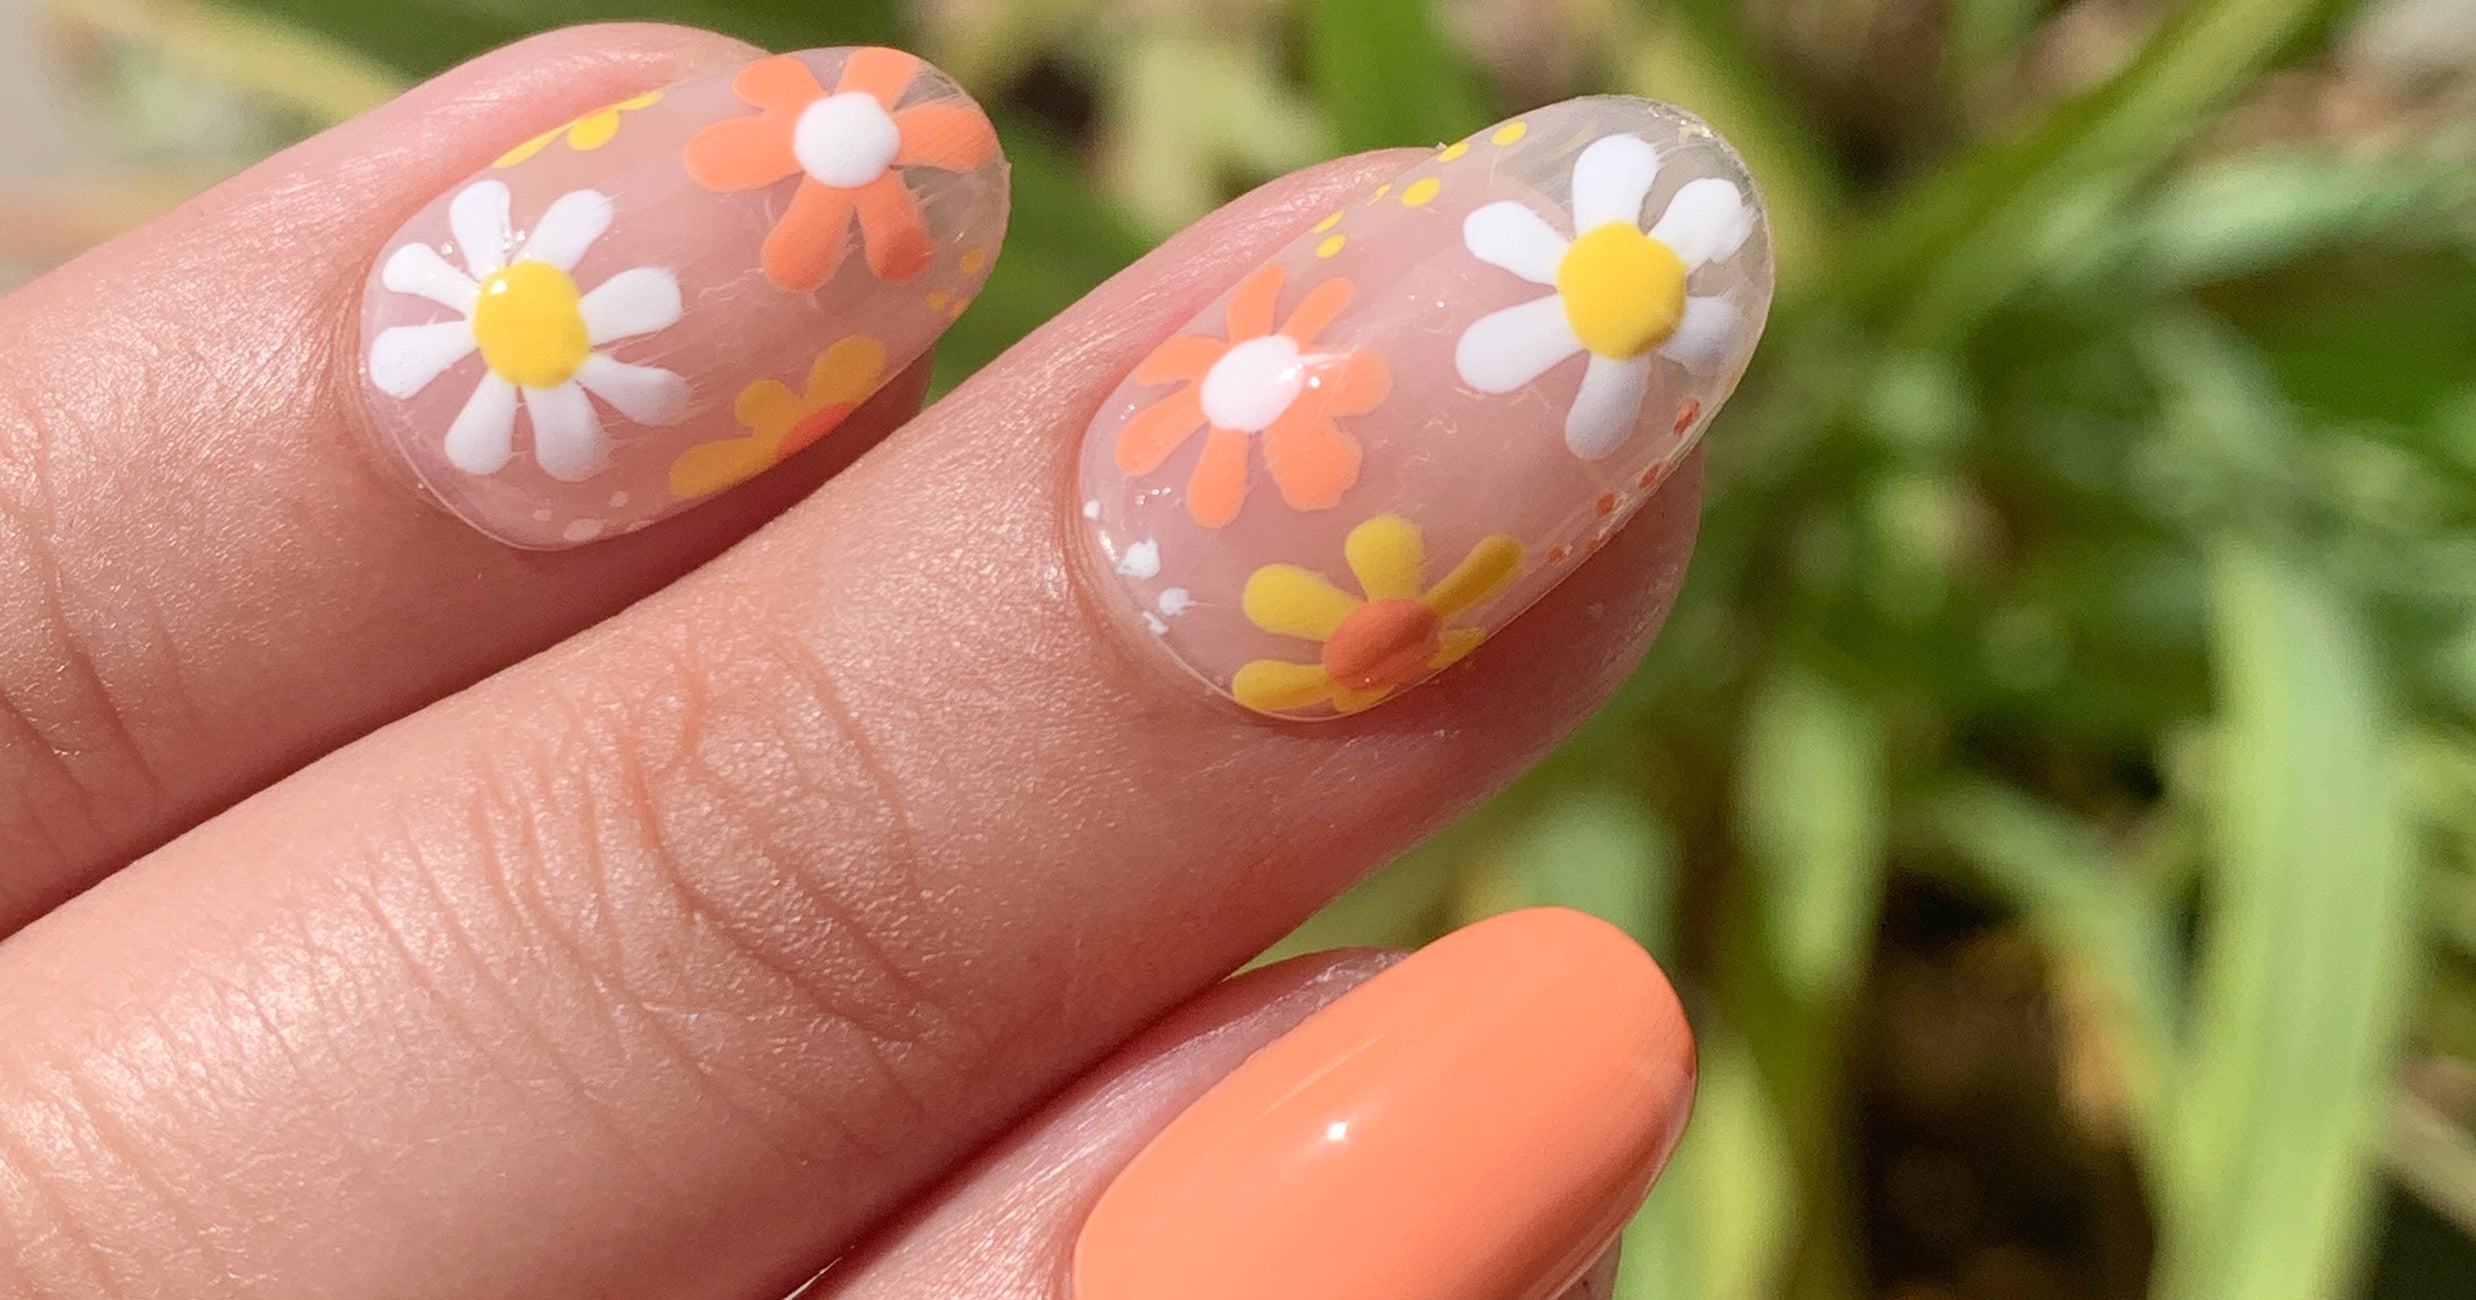 Transform Your Nails with This DIY Stone Nail Design Tutorial - wide 5